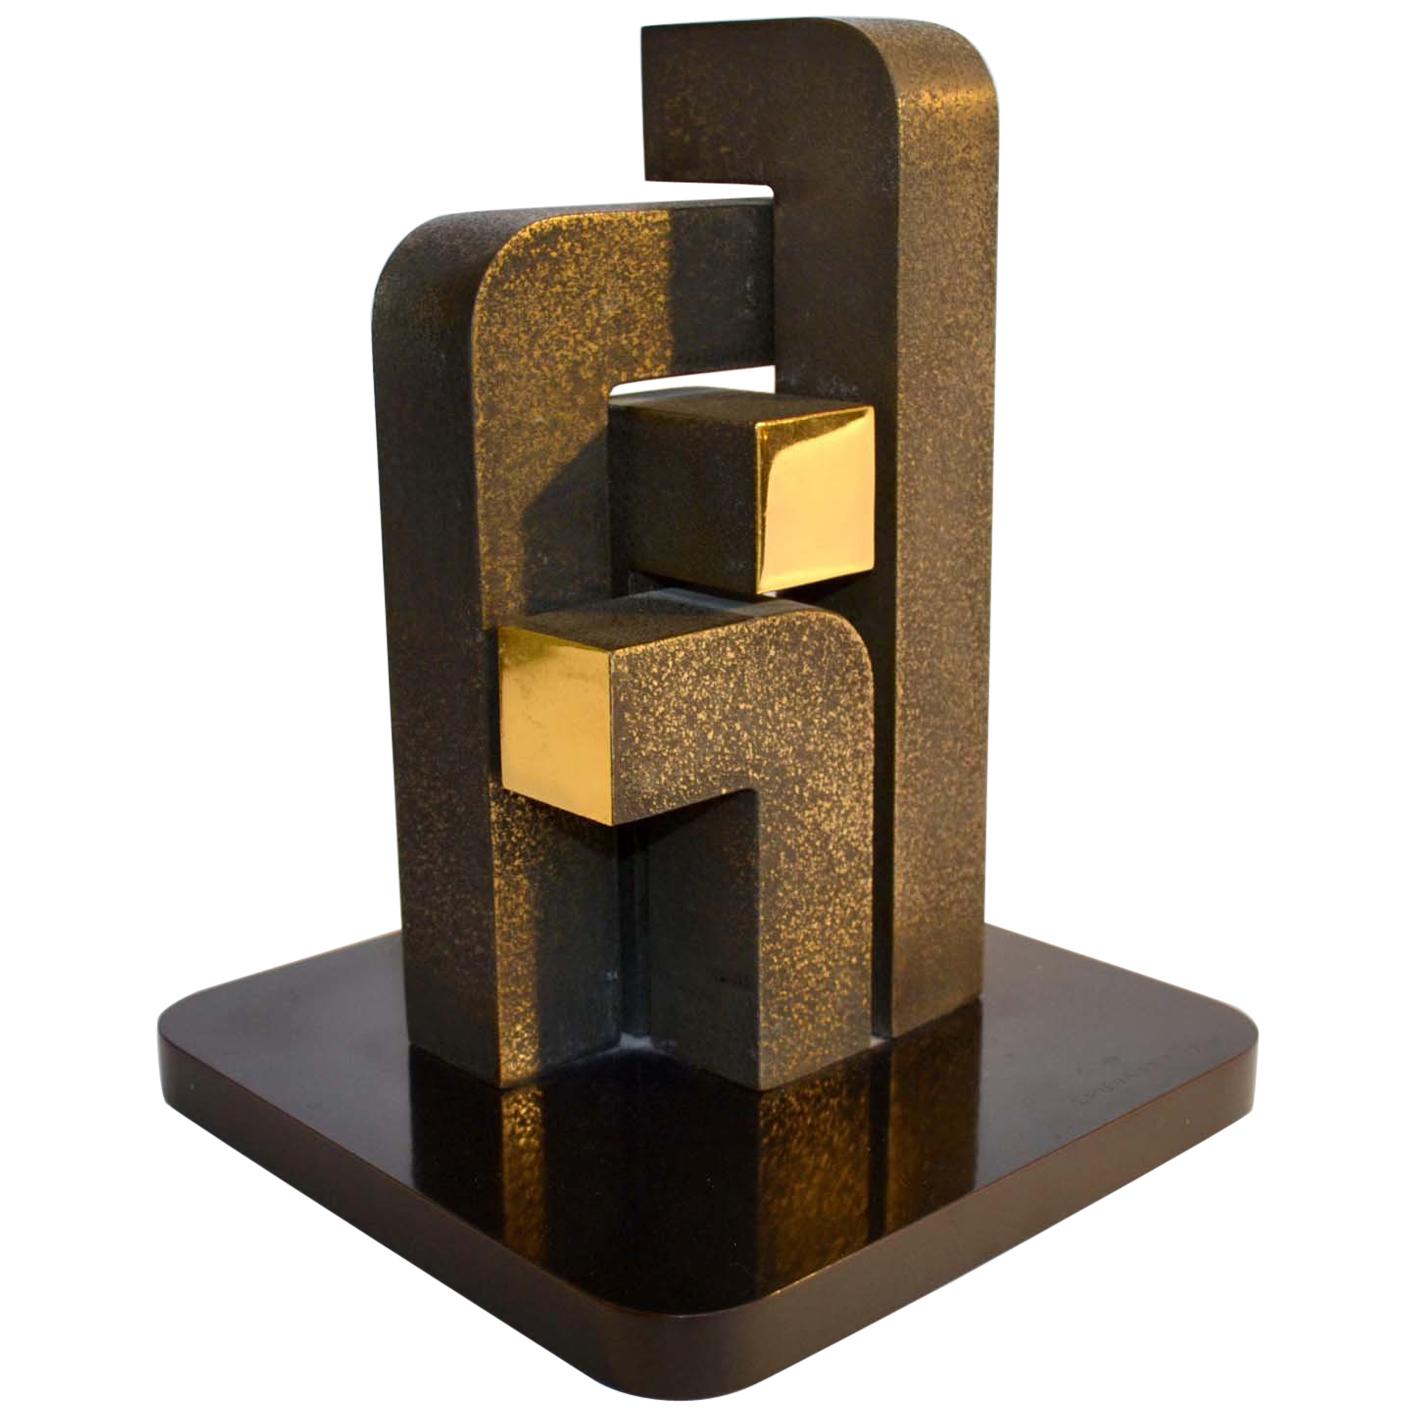 Abstract Geometric Minimalist Bronze Sculpture by Zonena 1979 in Limited Edition